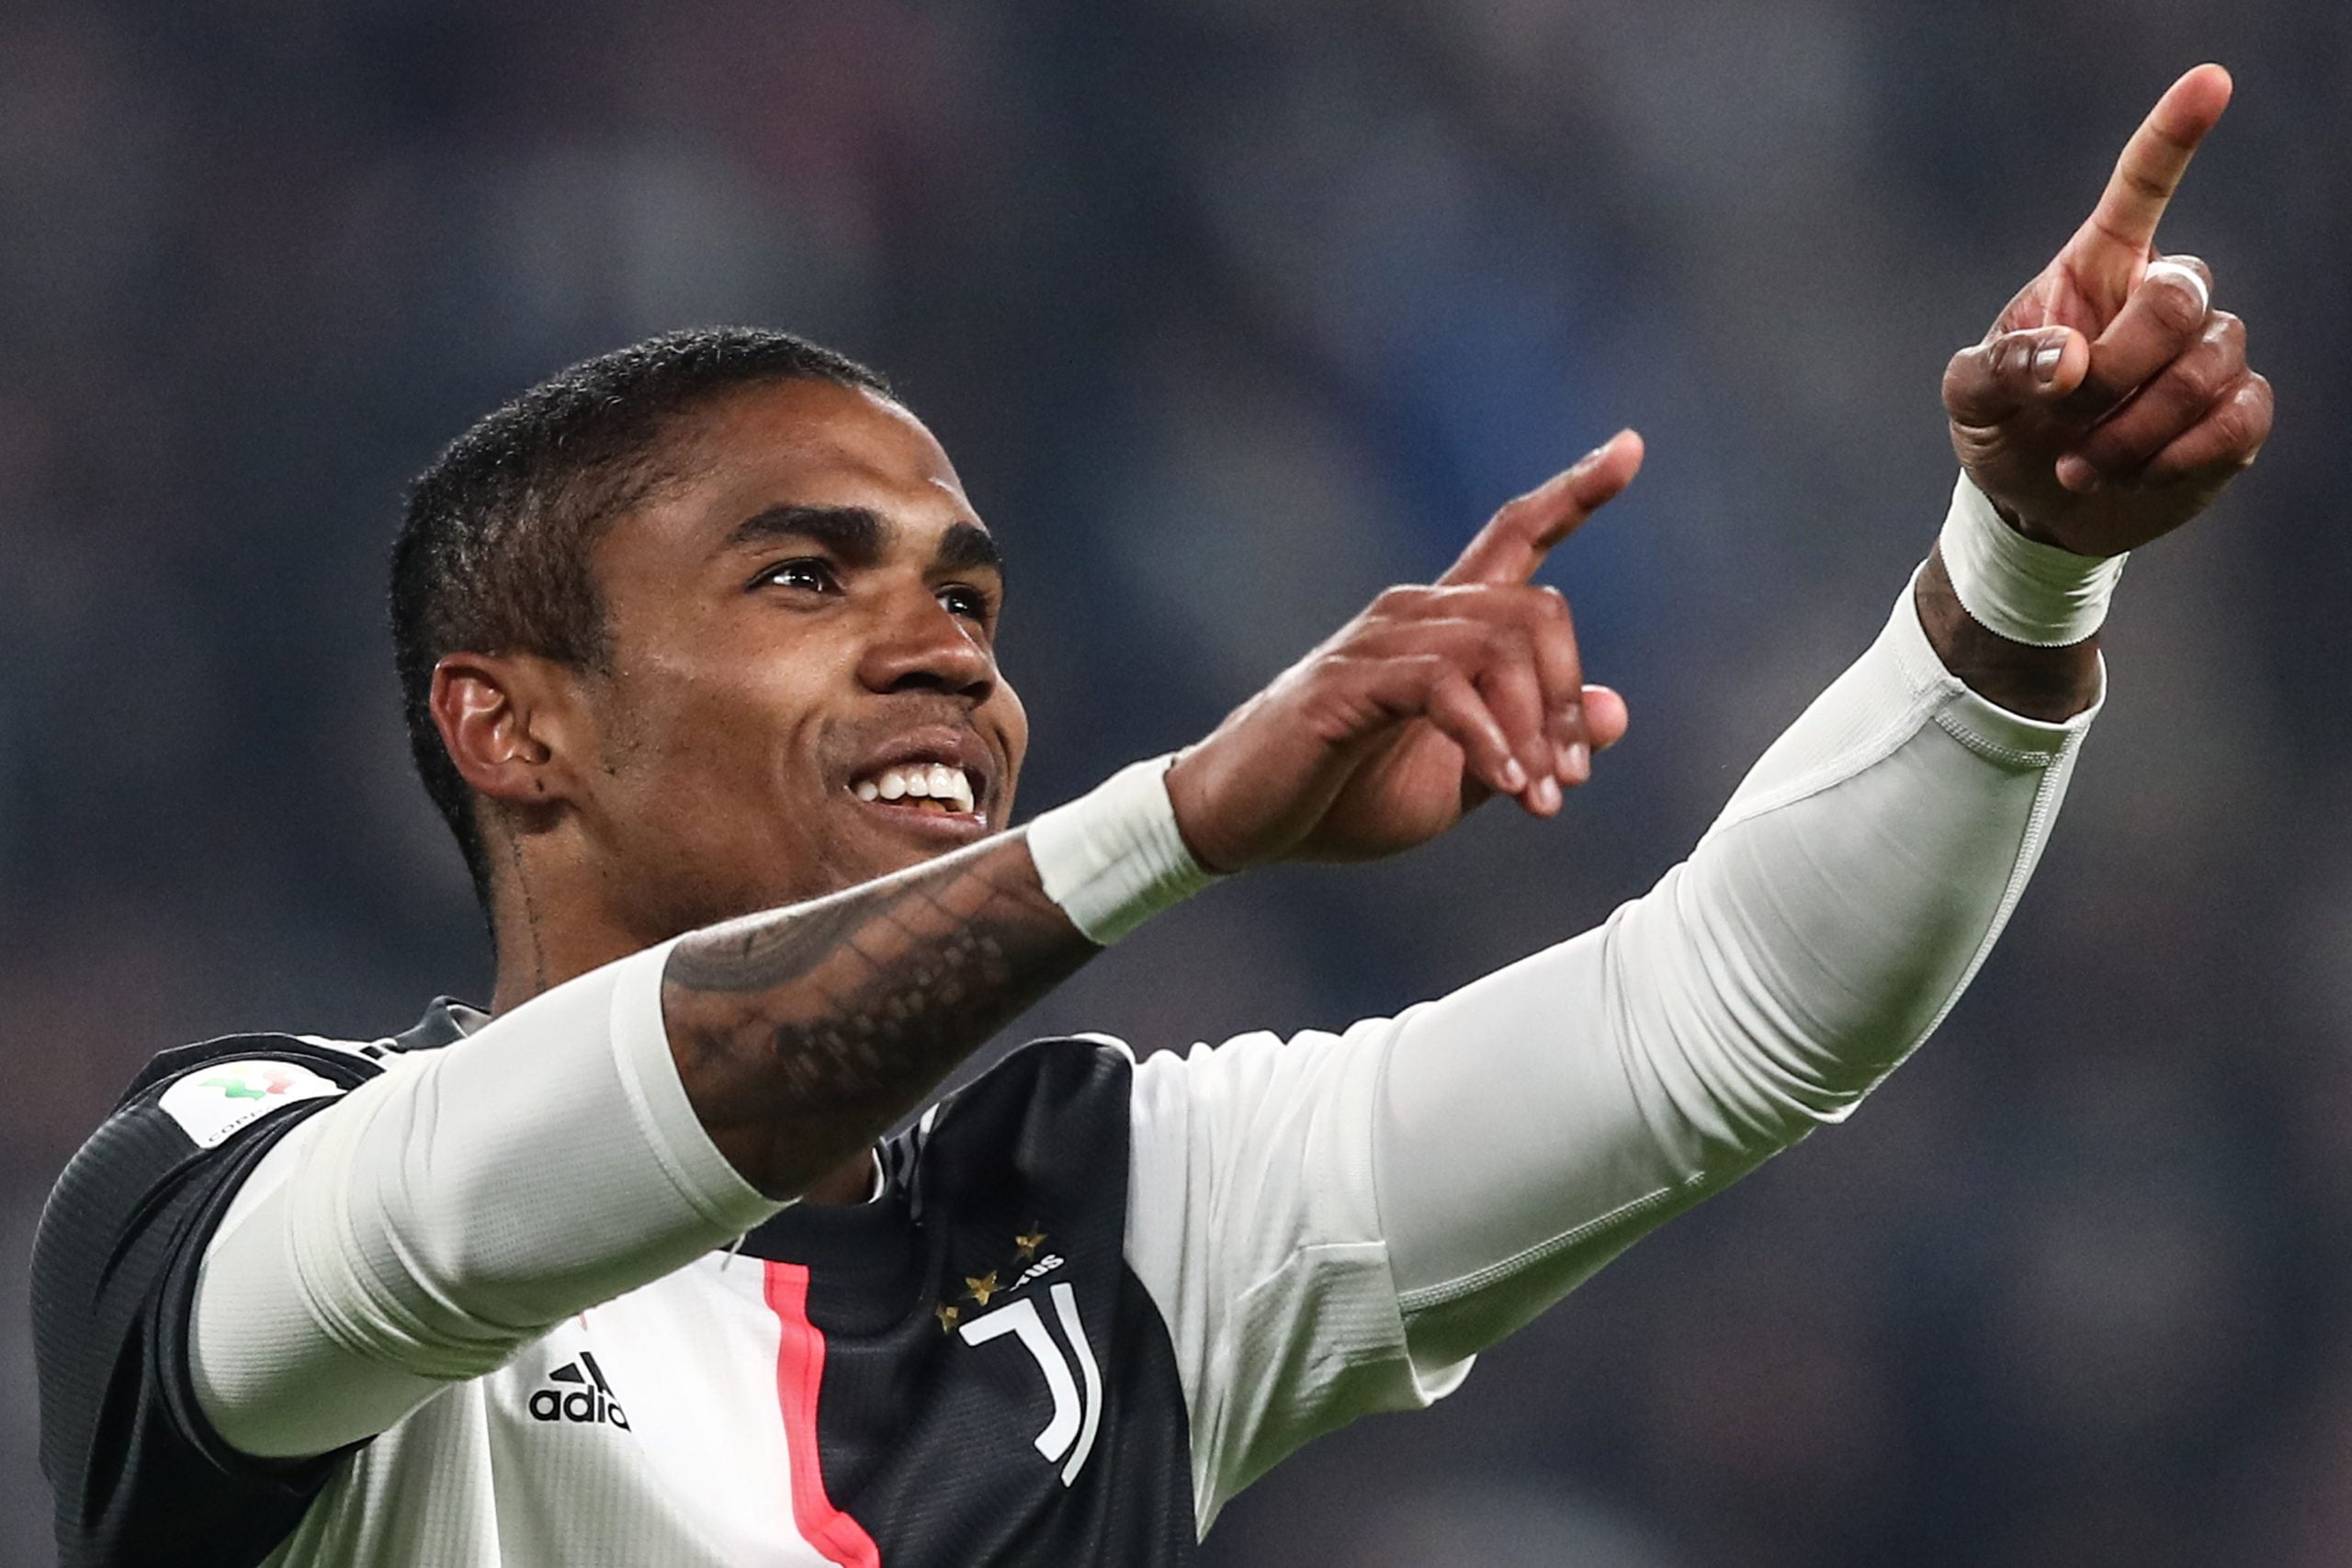 Juventus' Brazilian forward Douglas Costa celebrates after scoring a penalty and his team's fourth goal during the Italian Cup (Coppa Italia) round of 16 football match Juventus vs Udinese on January 15, 2020 at the Juventus stadium in Turin. (Photo by Isabella BONOTTO / AFP) (Photo by ISABELLA BONOTTO/AFP via Getty Images)